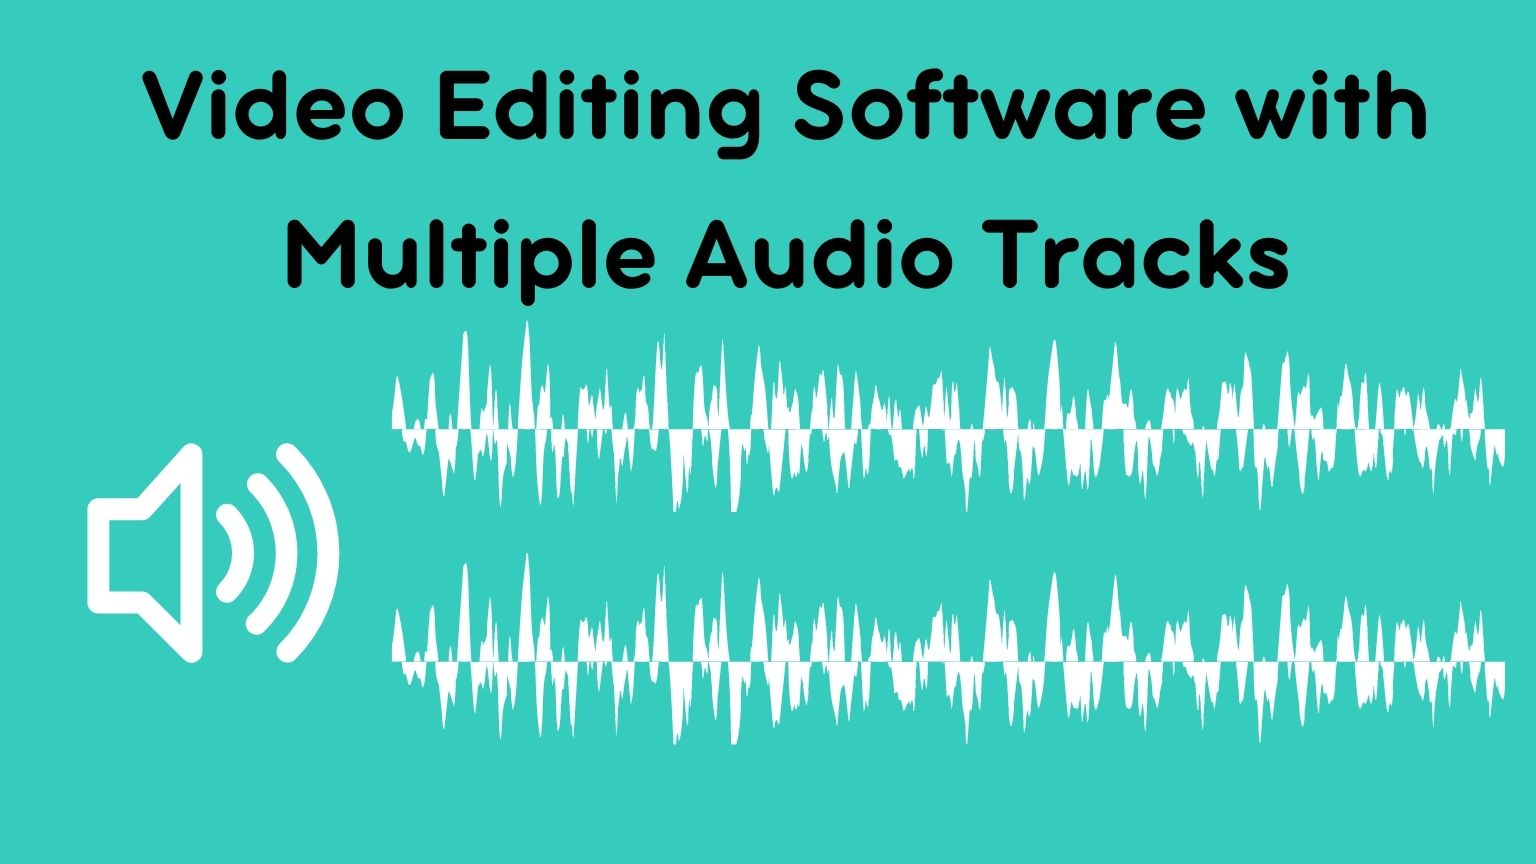 Video Editing Software with Multiple Audio Tracks